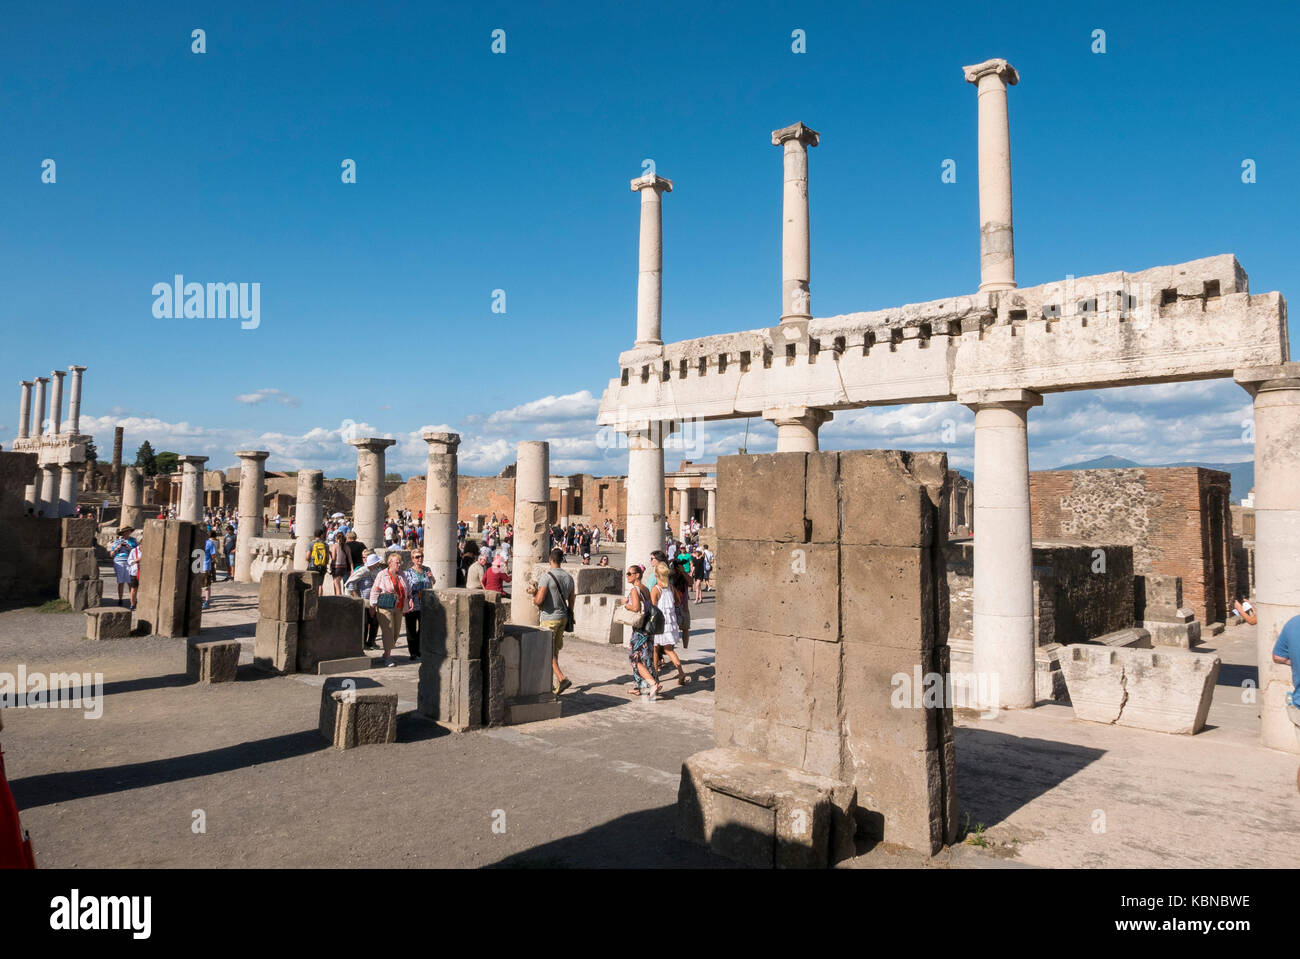 The Ancient  Ruins of Pompeii in Campania Italy. Stock Photo